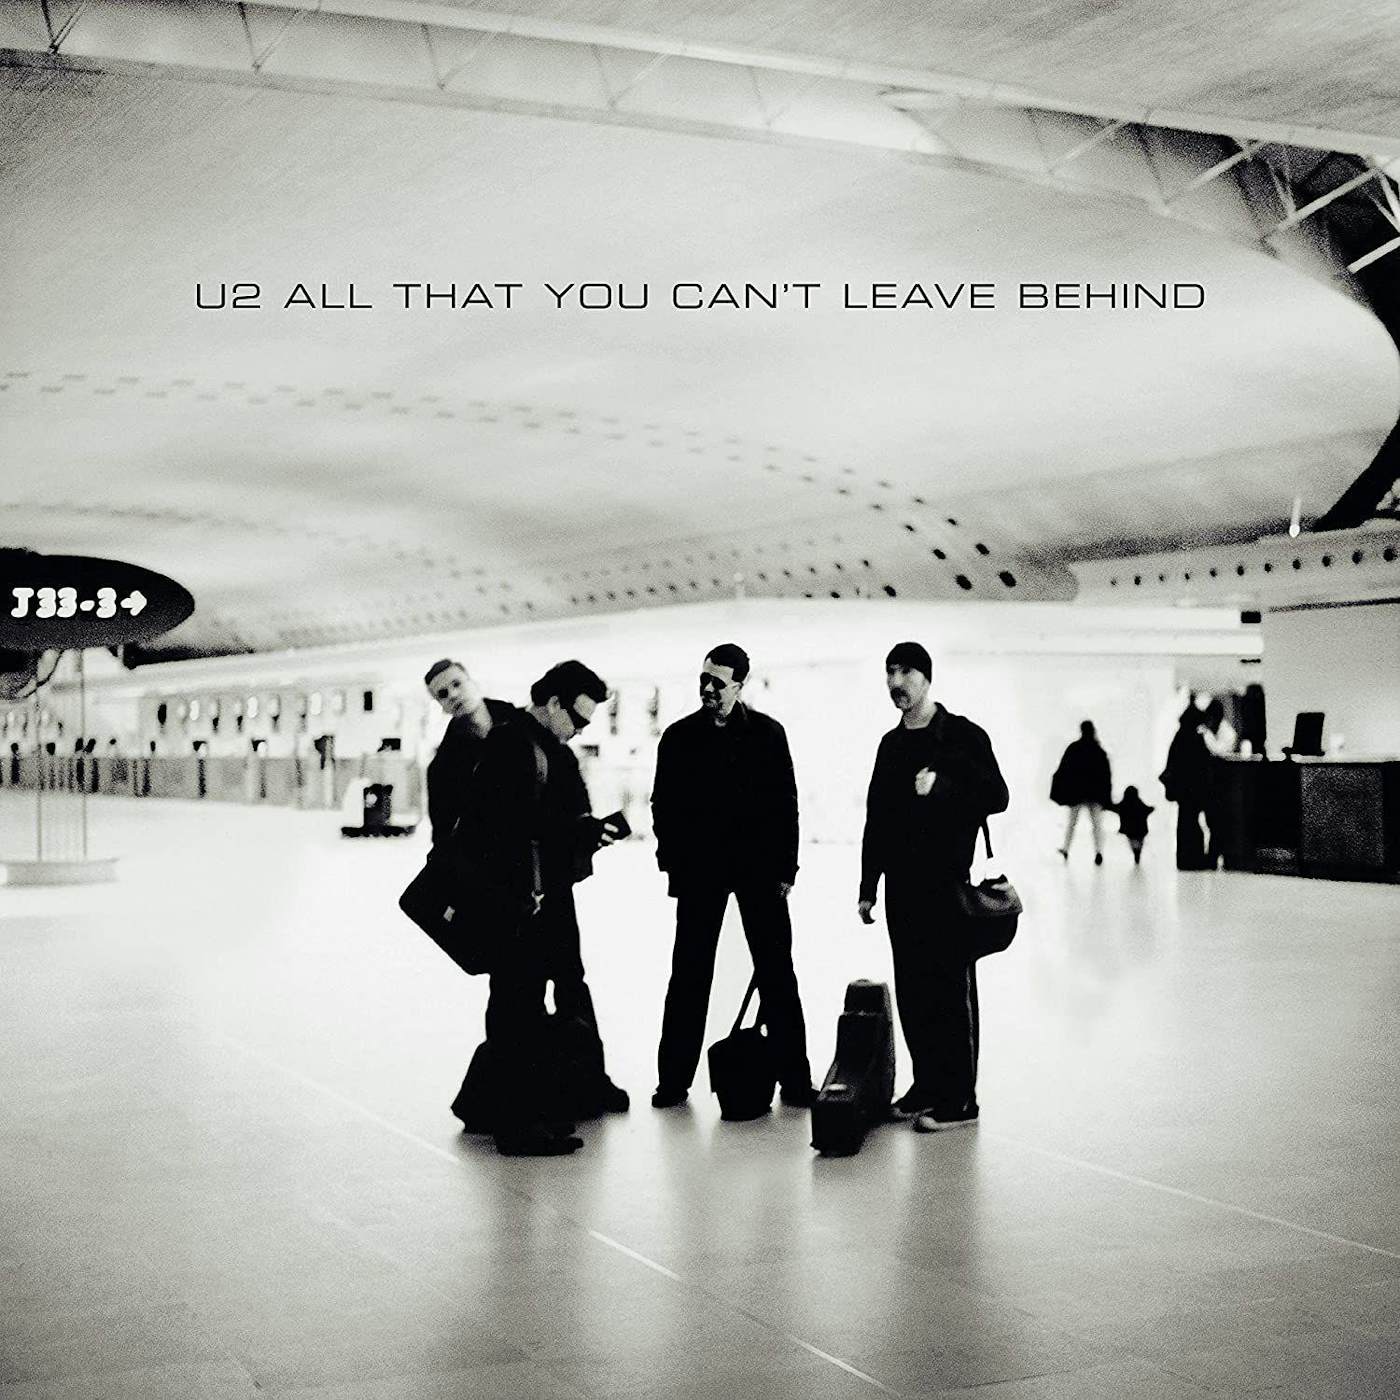 U2 All That You Can’t Leave Behind - 20th Anniversary (11lp Super Deluxe Box Set) (Vinyl)